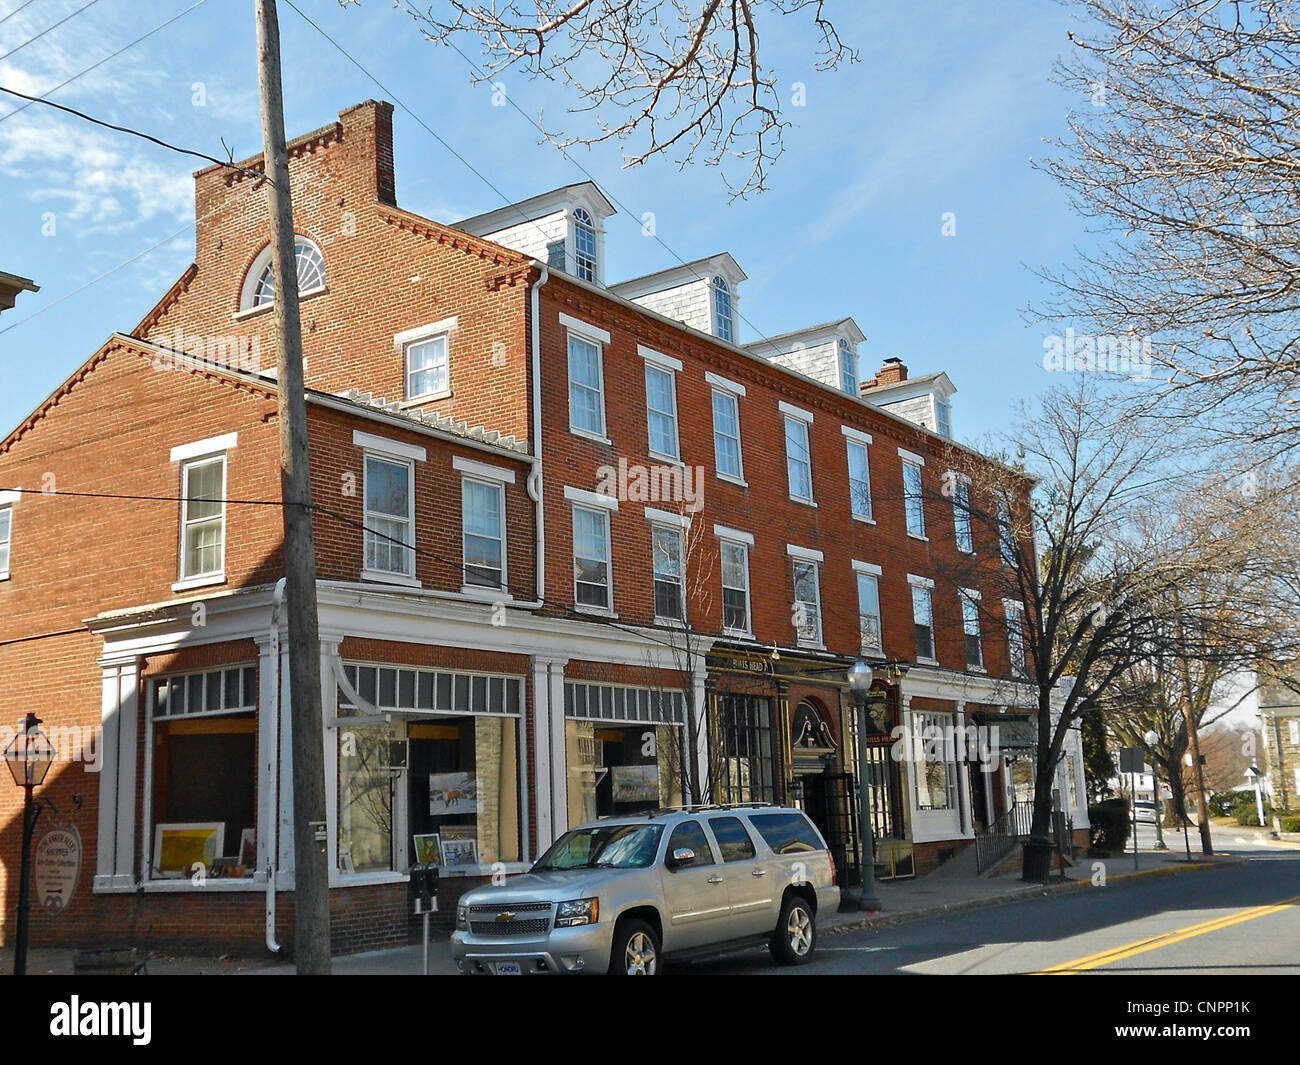 Old inn in Lititz Pennsylvania, once owned by John Sutter. Part of the Lititz Historic District in Lancaster County. Stock Photo